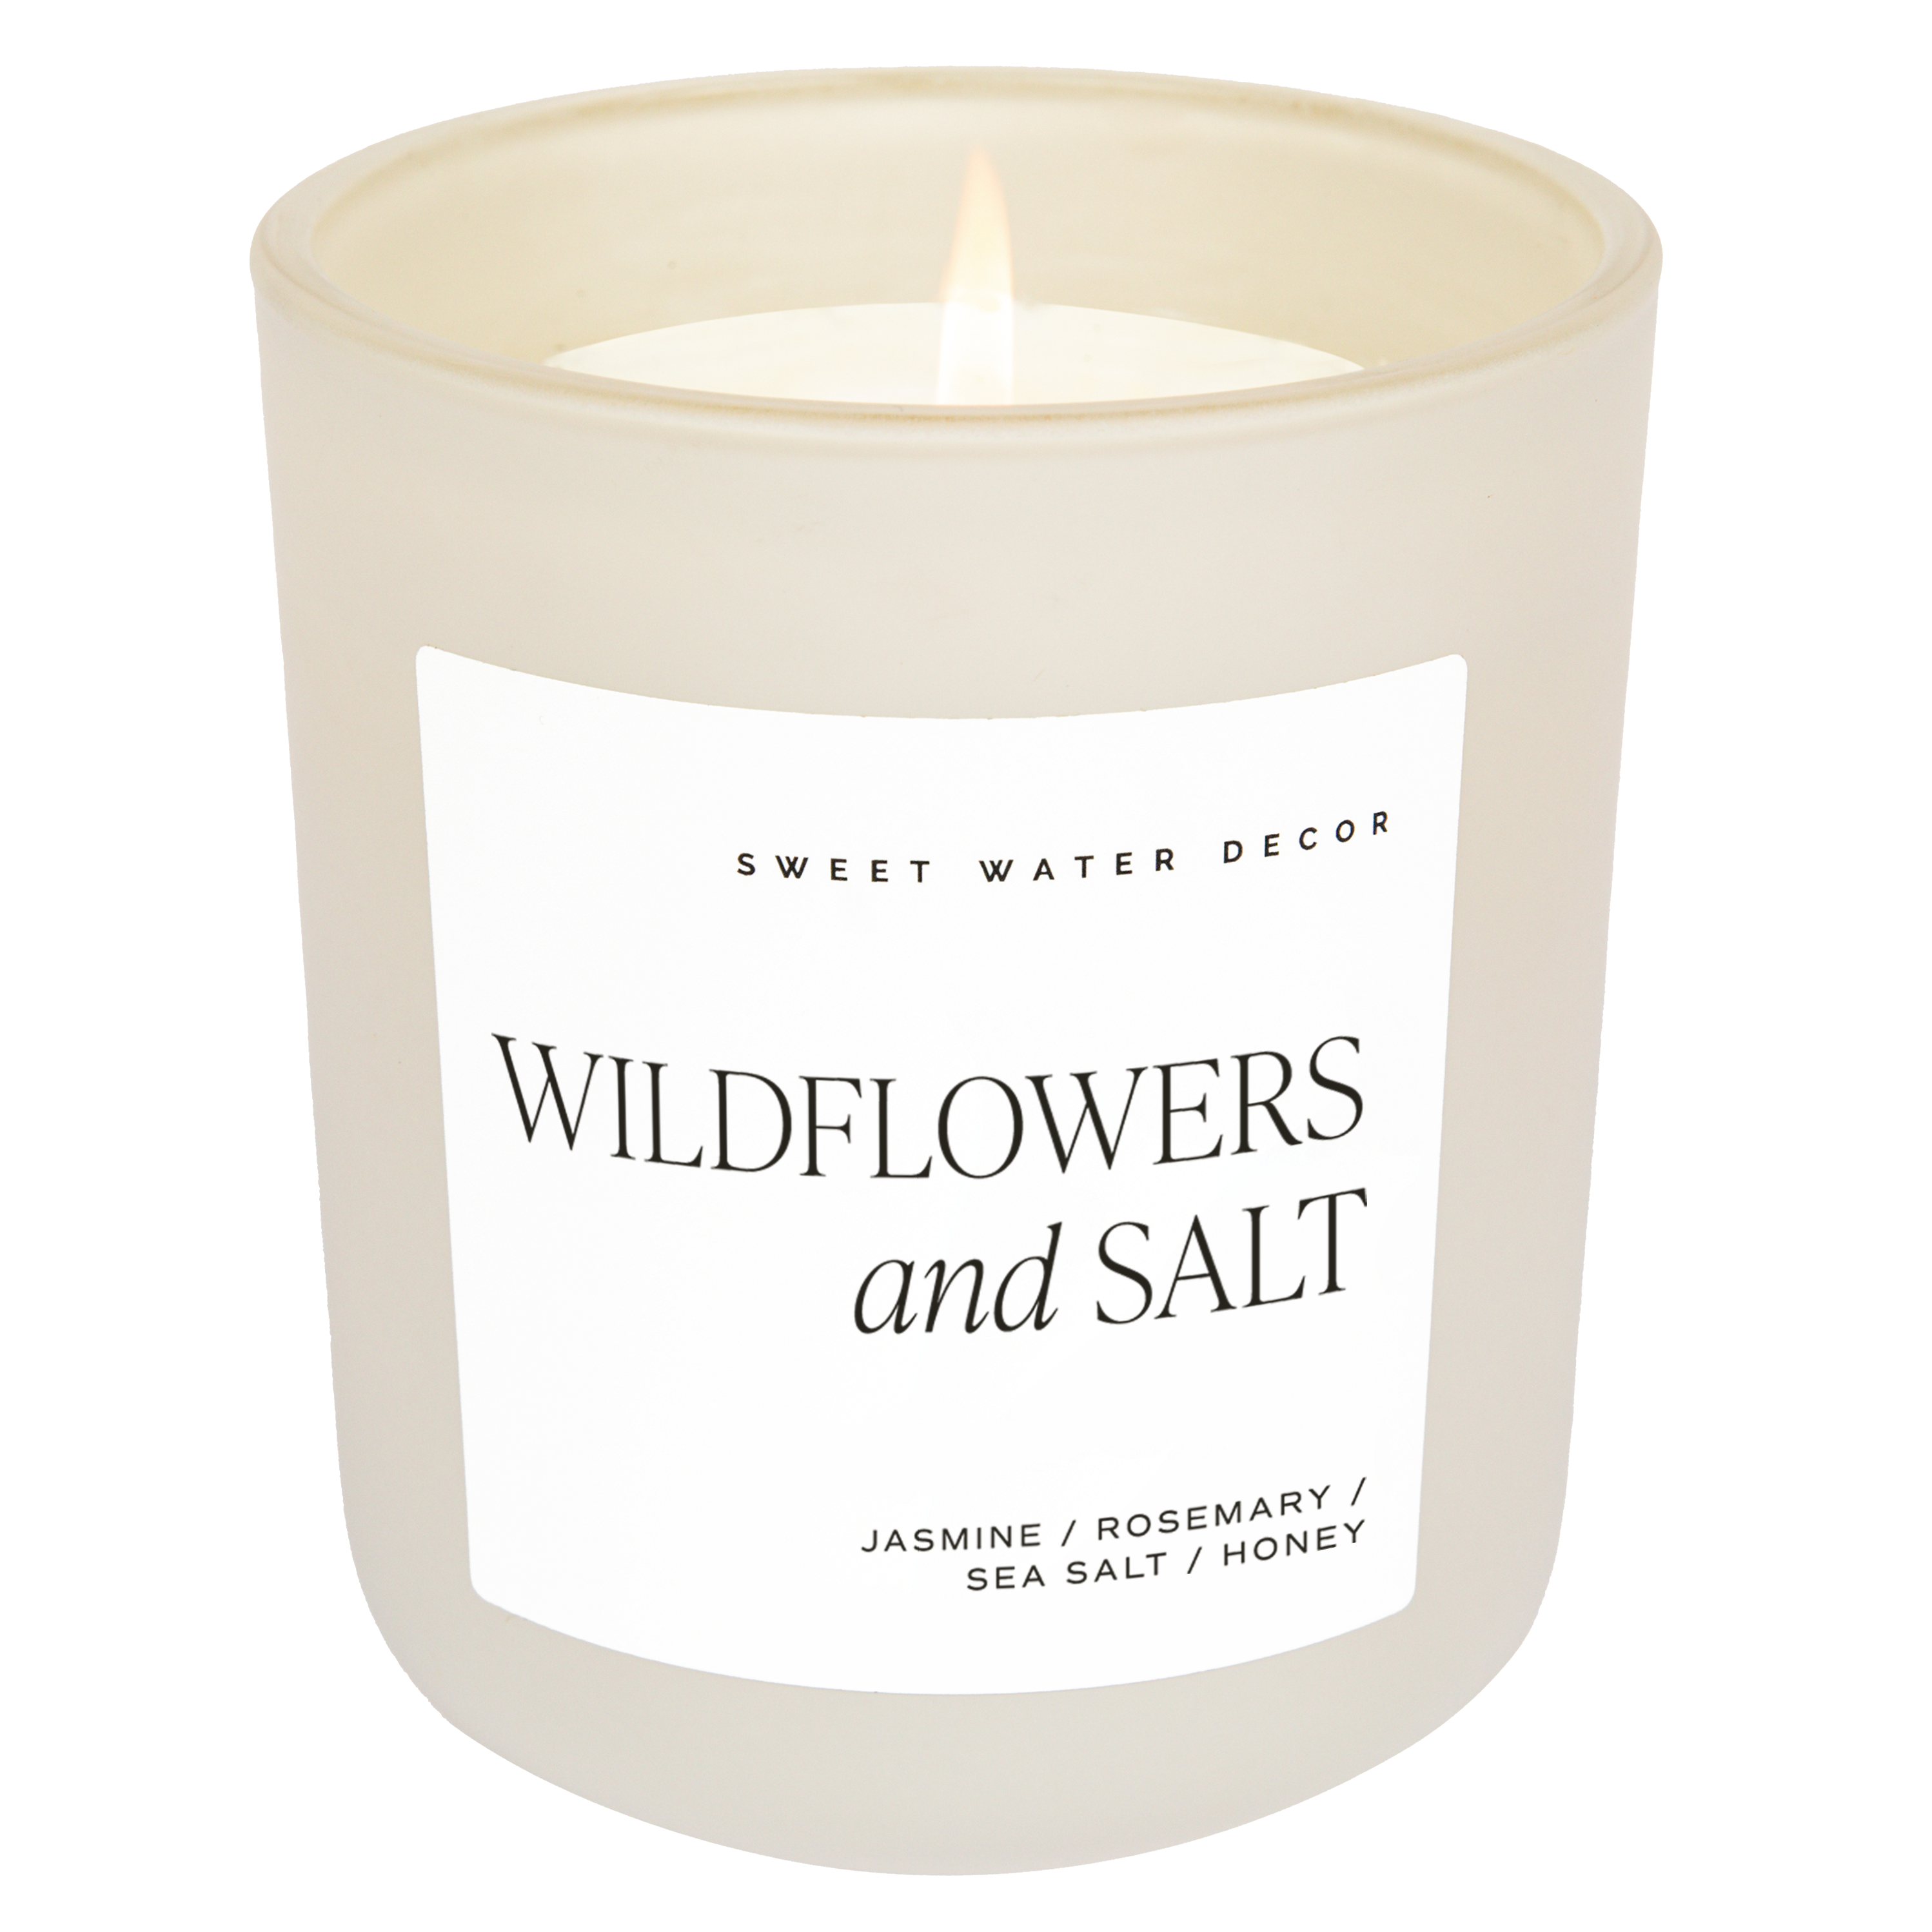 Wildflowers and Salt Soy Candle - Tan Matte Jar - 15 oz